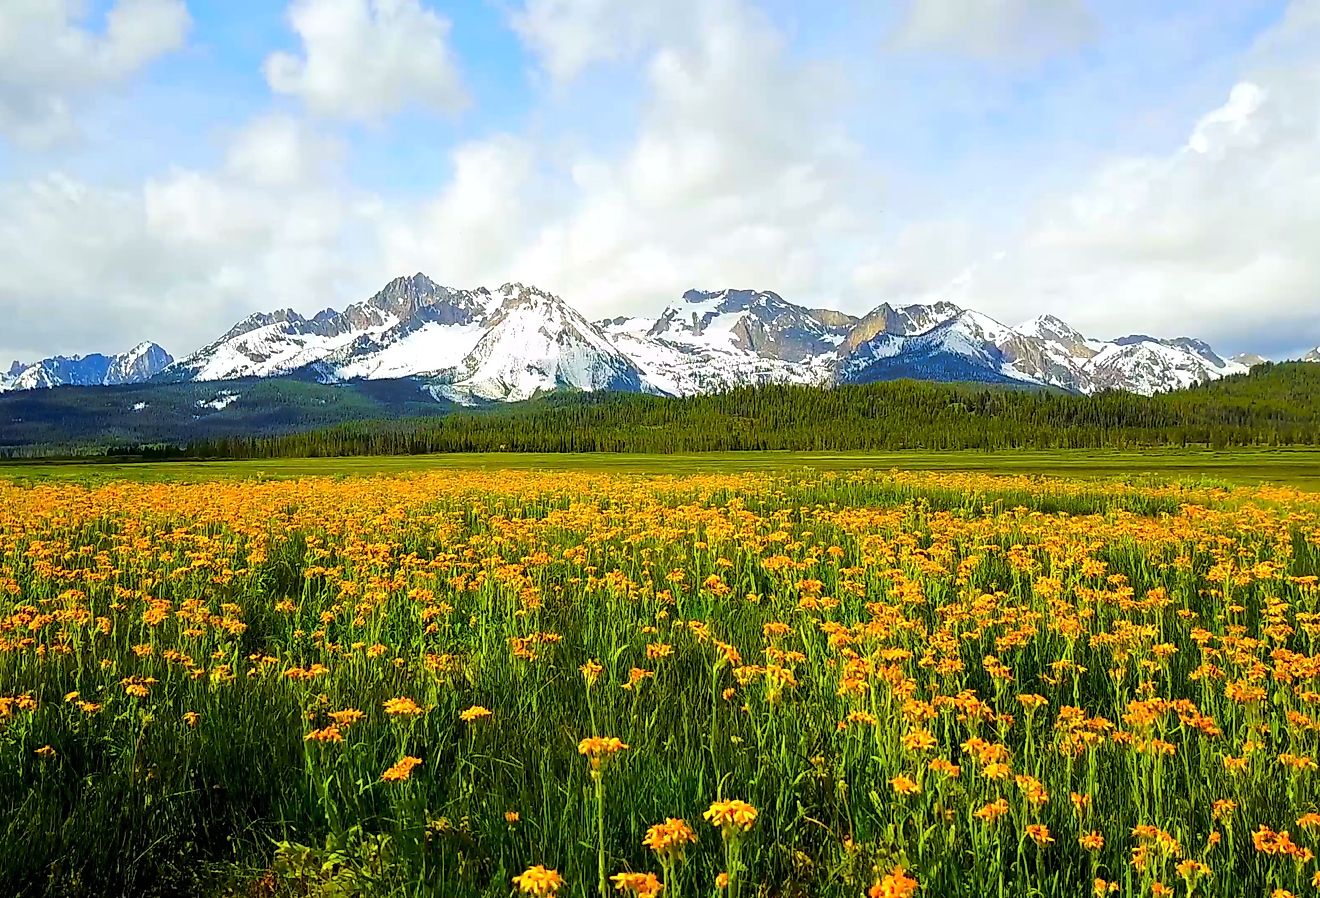 Yellow flowers in a field with the Sawtooth Mountains in the background, Idaho.